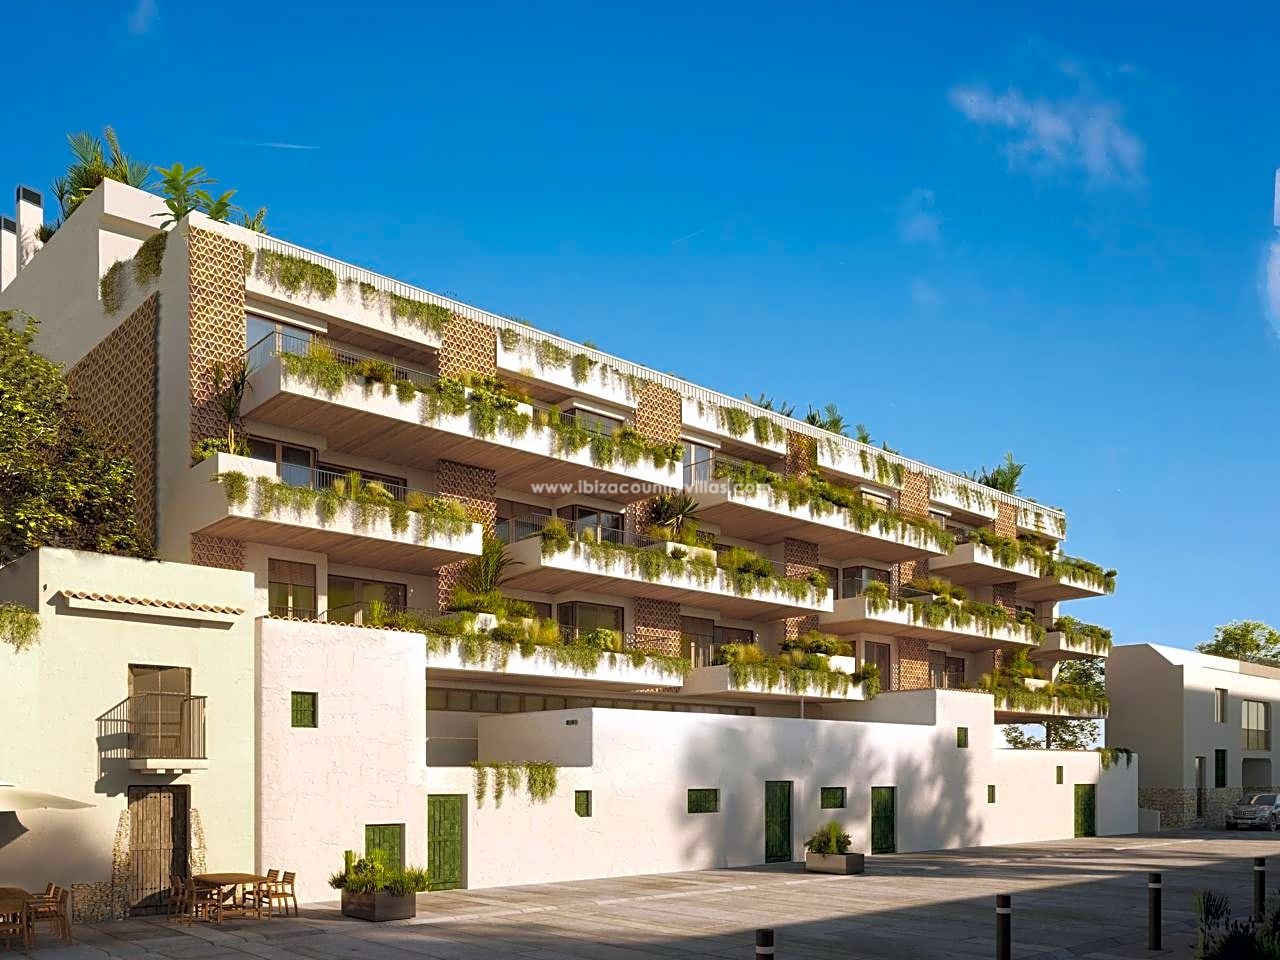 Brand new luxury apartment in the centre of Santa Eulalia